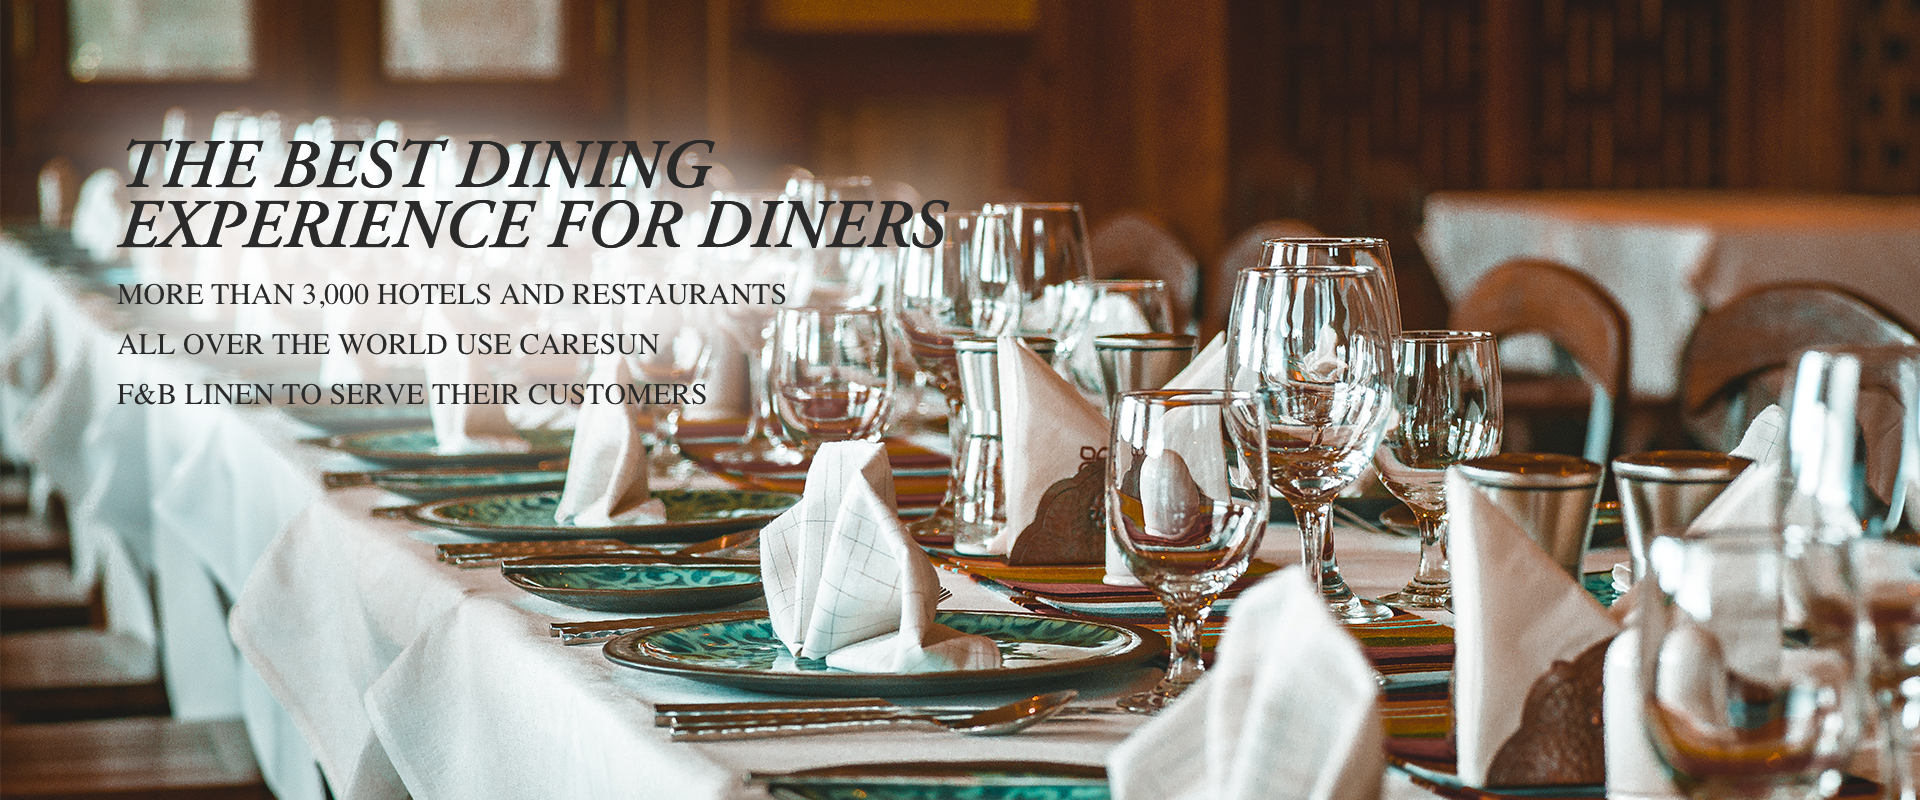 The best dining experience for diners